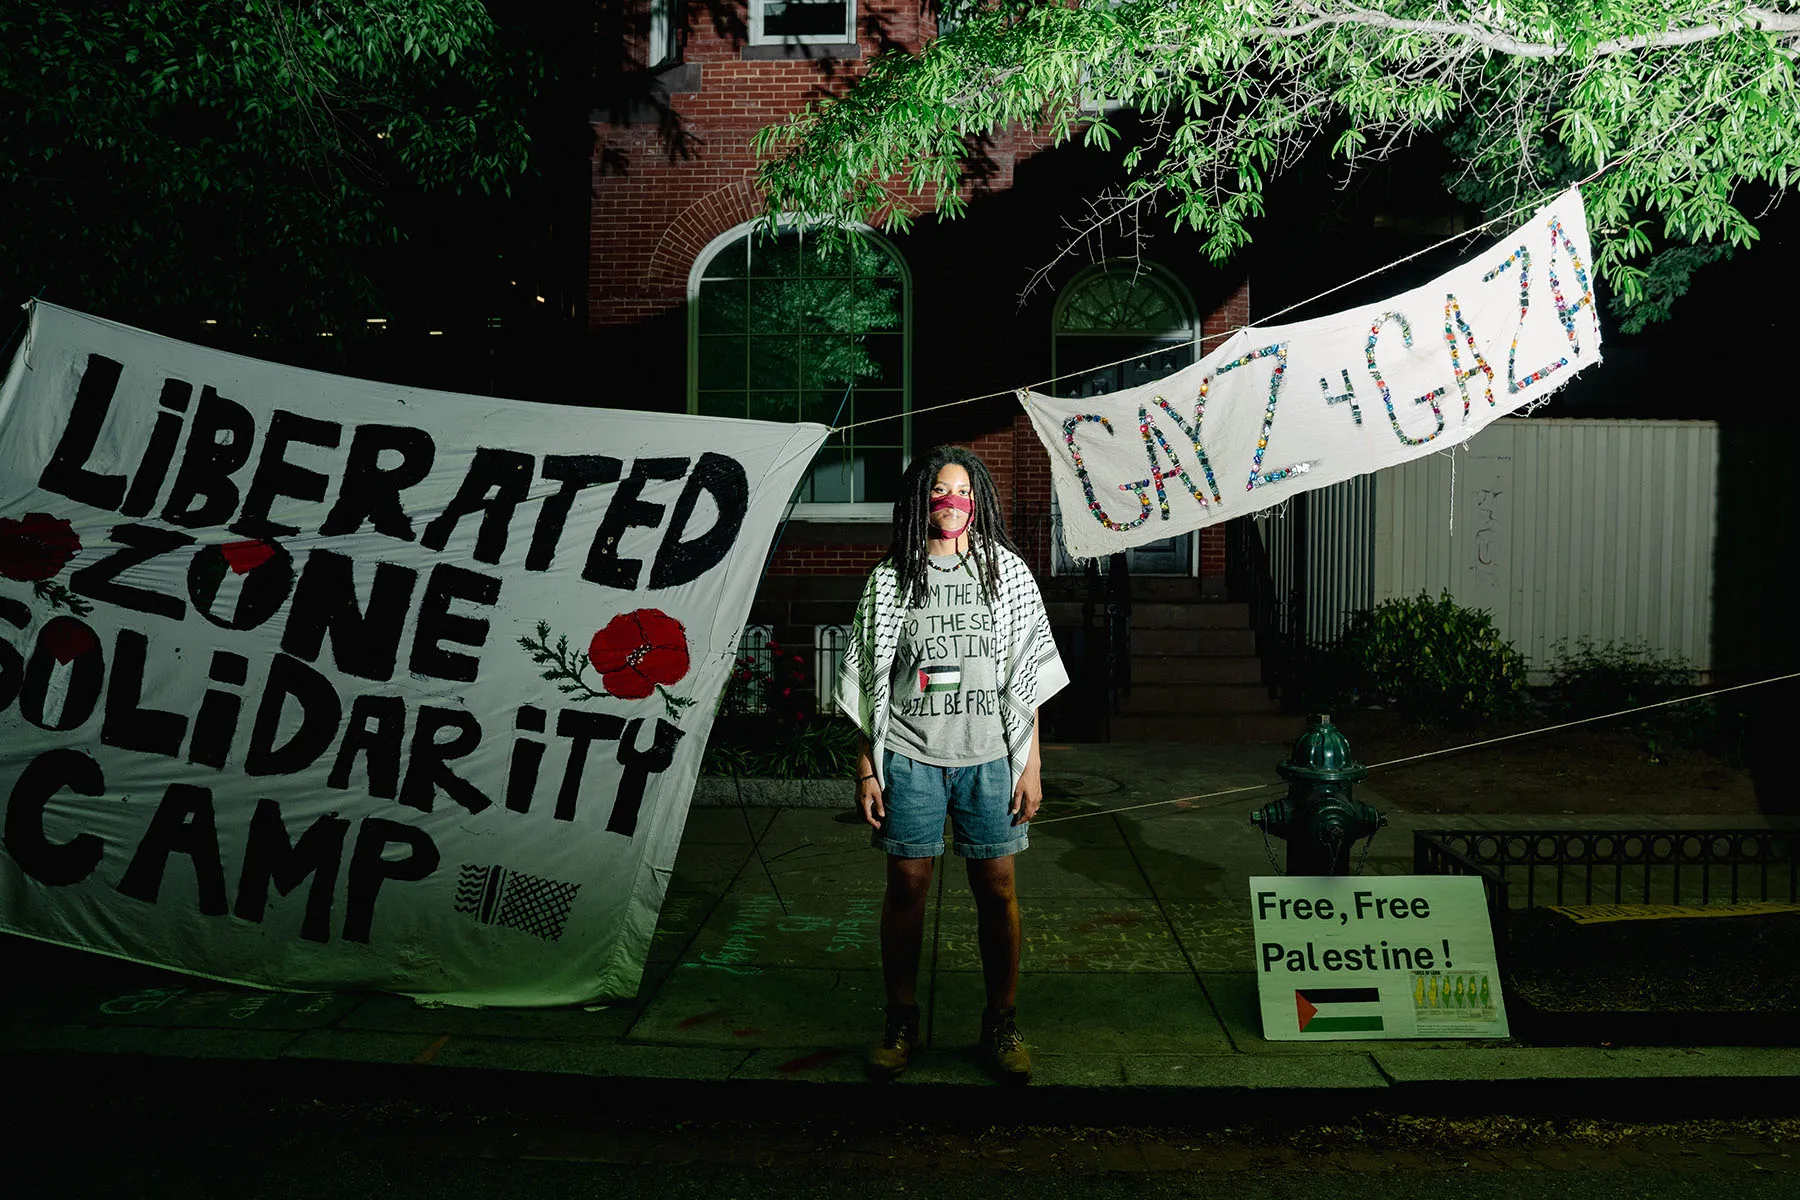 Bobbi-Angelica Morris poses for a portrait at University Yard on the George Washington University campus in front of signs that read "Liberated zone solidarity camp" and "GAYZ 4 GAZA"